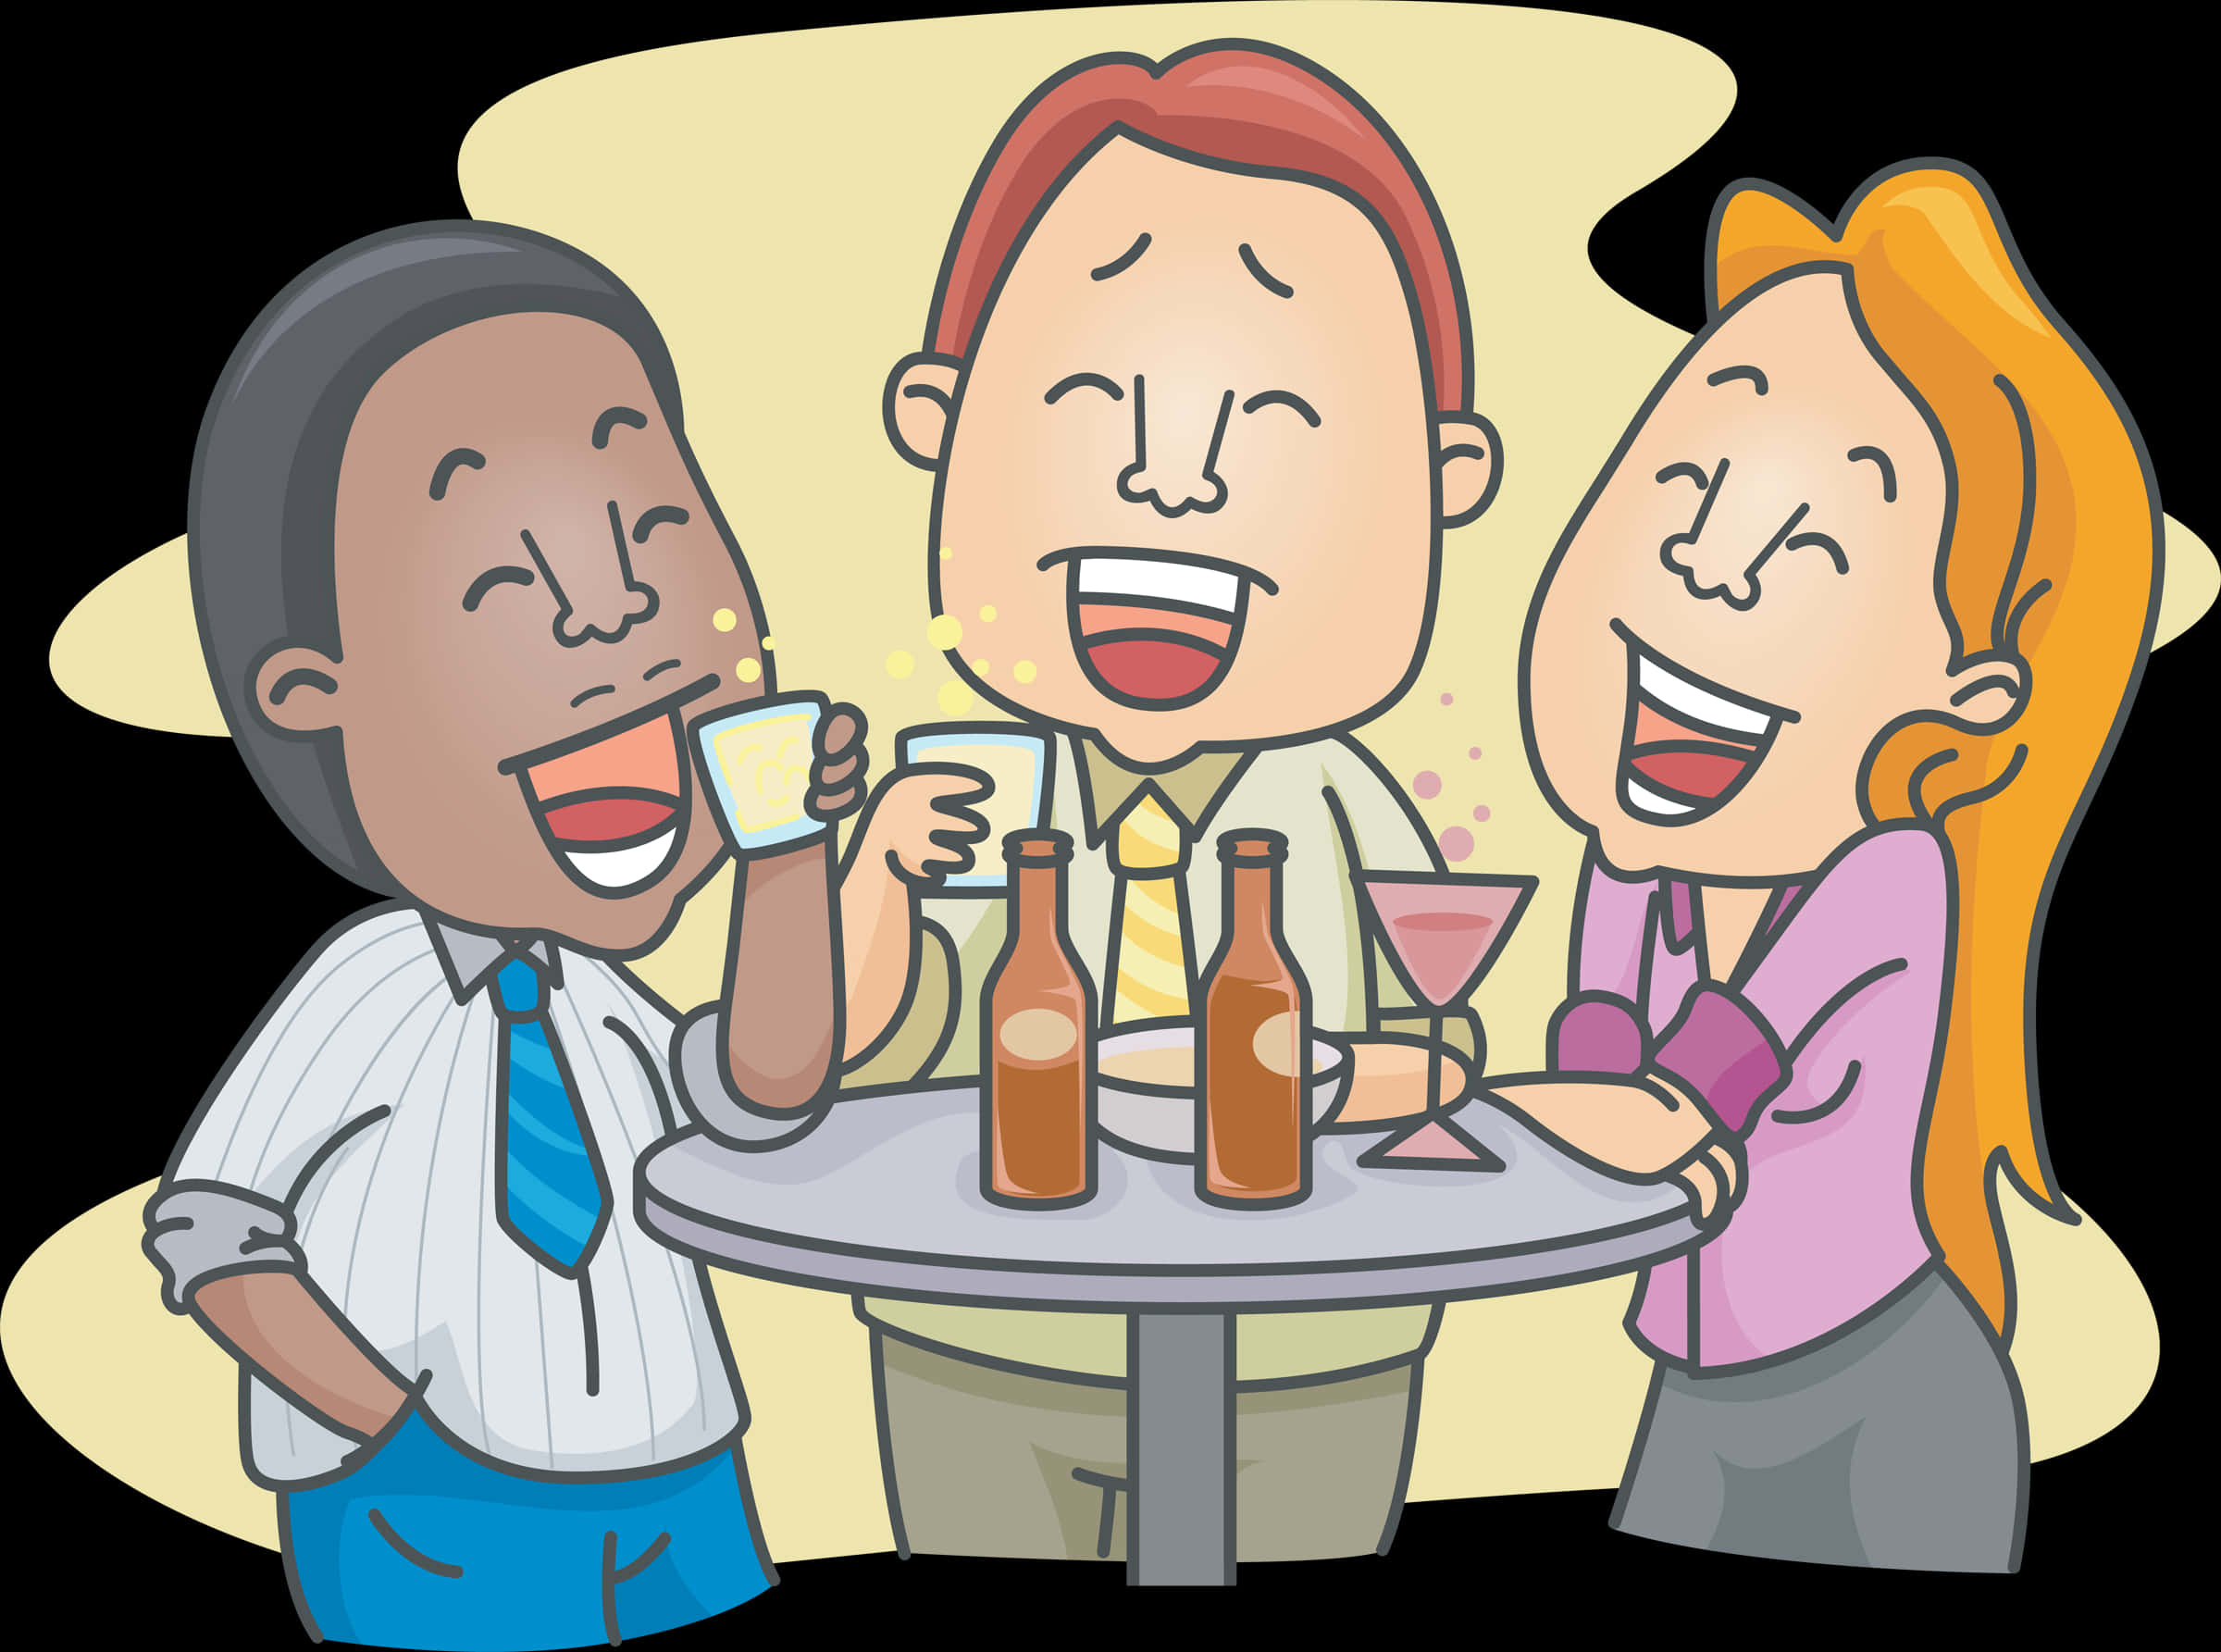 Animated Friends Enjoying Drinks PNG image